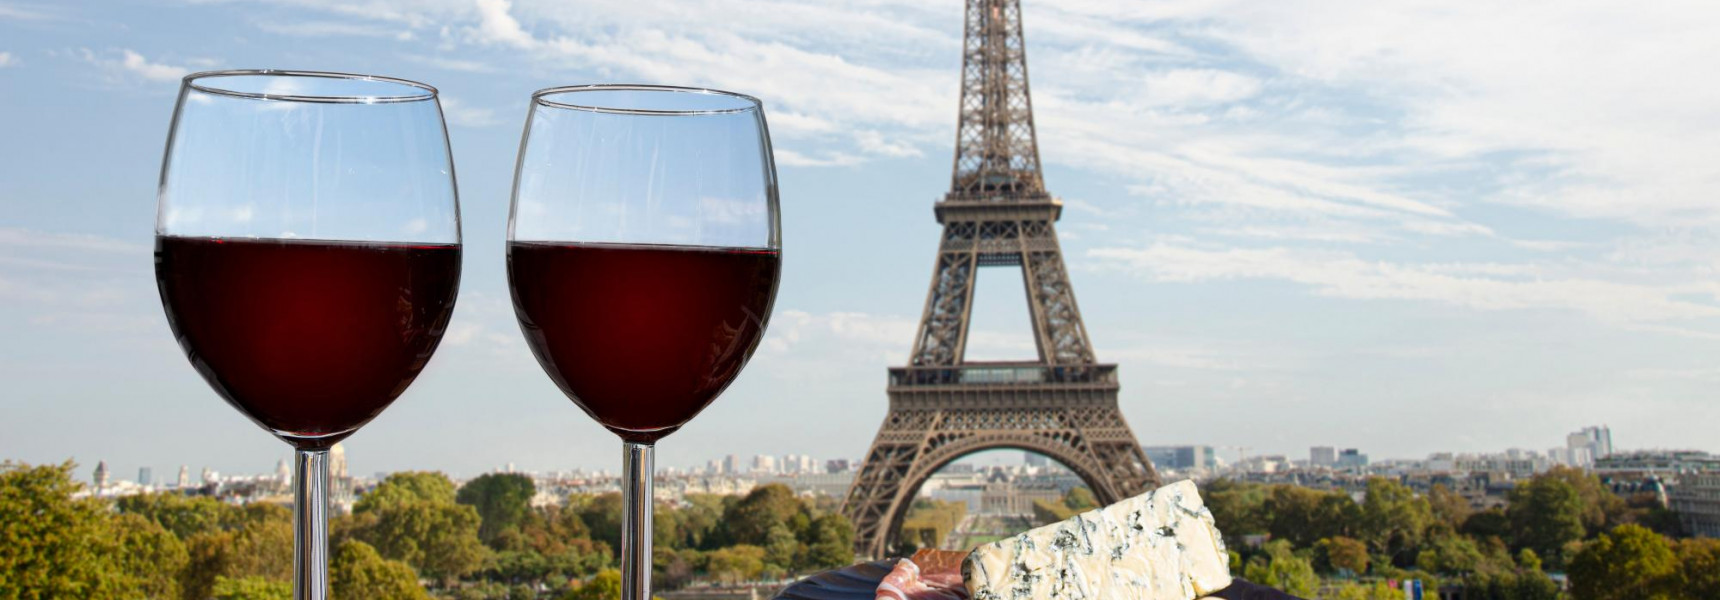 Top 5 Wine Tours that leave from Paris